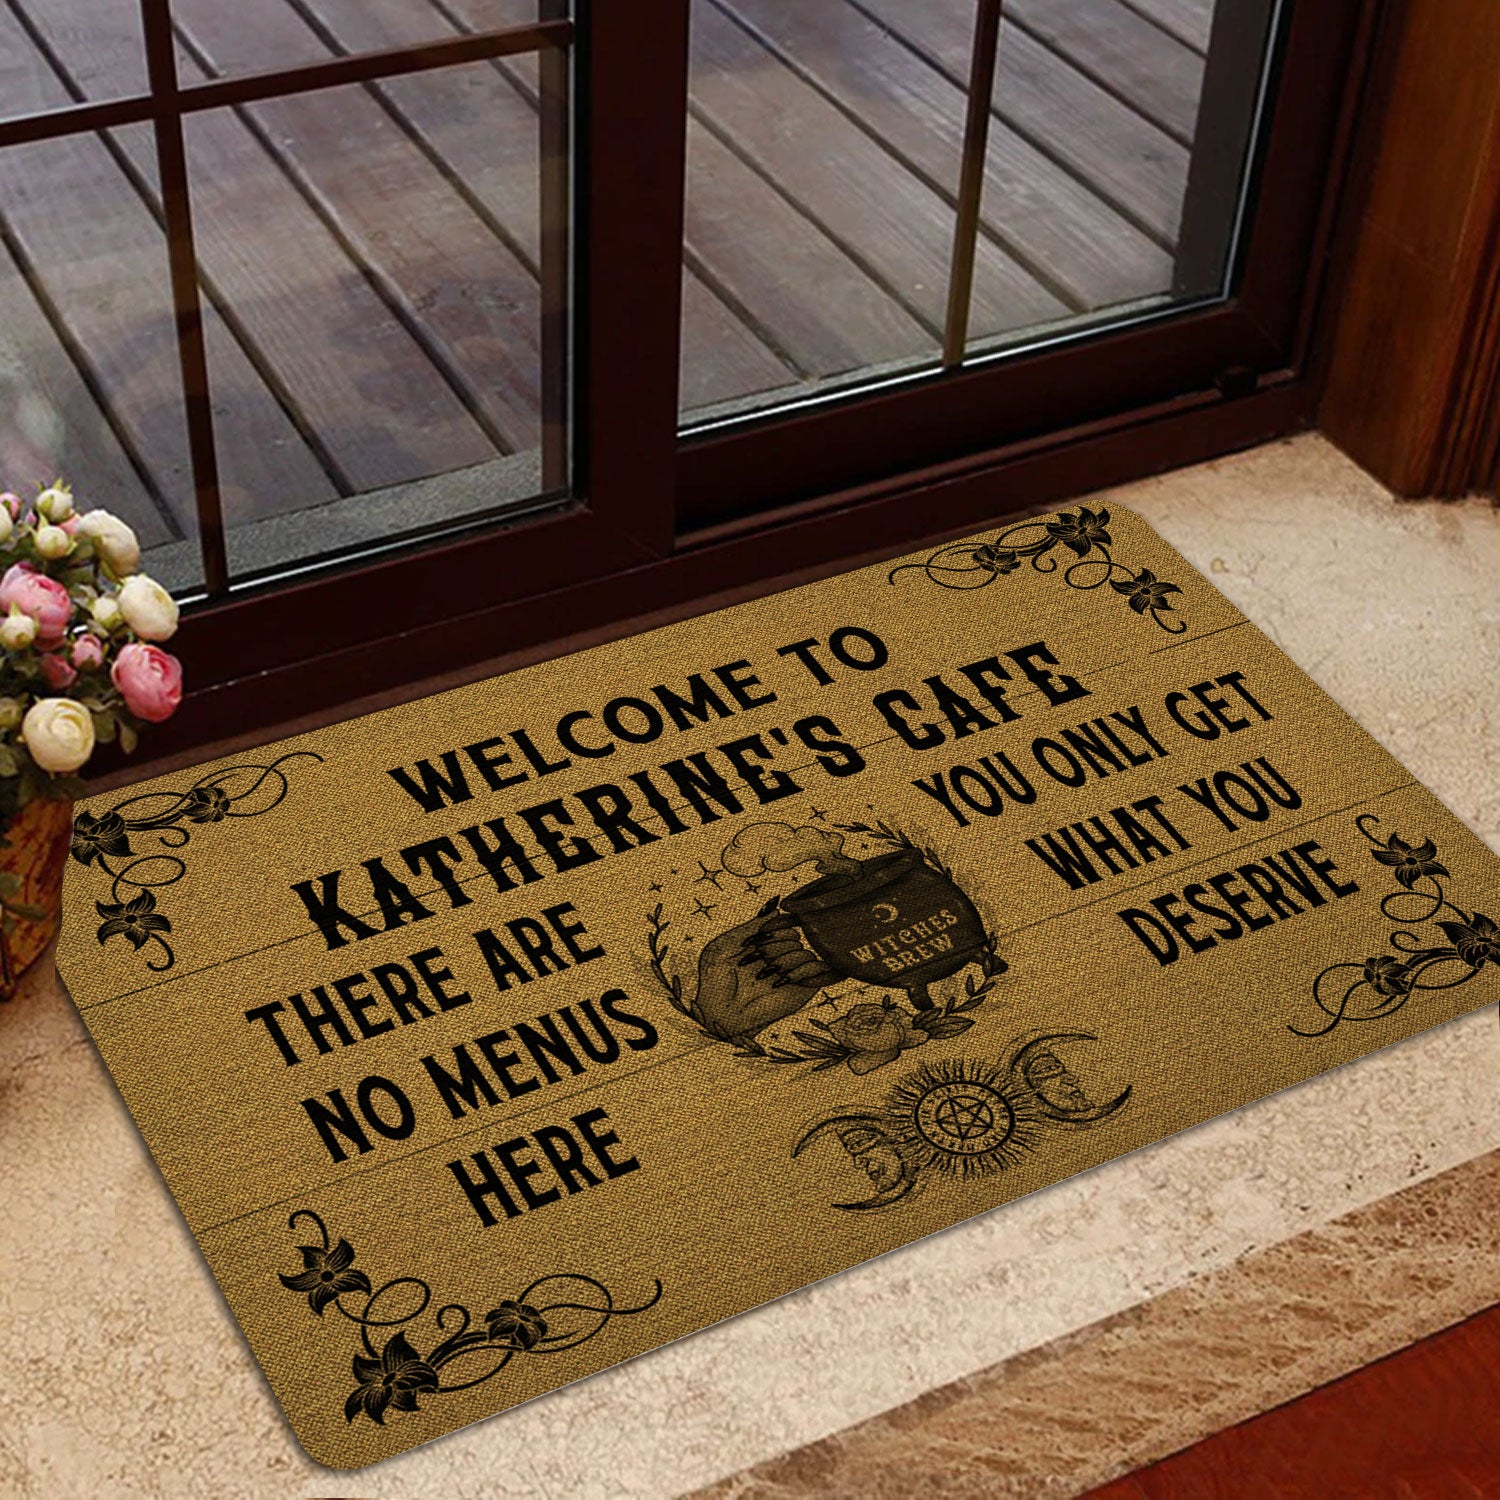 Ohaprints-Doormat-Outdoor-Indoor-Witch-Welcome-To-Cafe-House-Wicca-Witch-Custom-Personalized-Name-Rubber-Door-Mat-69-